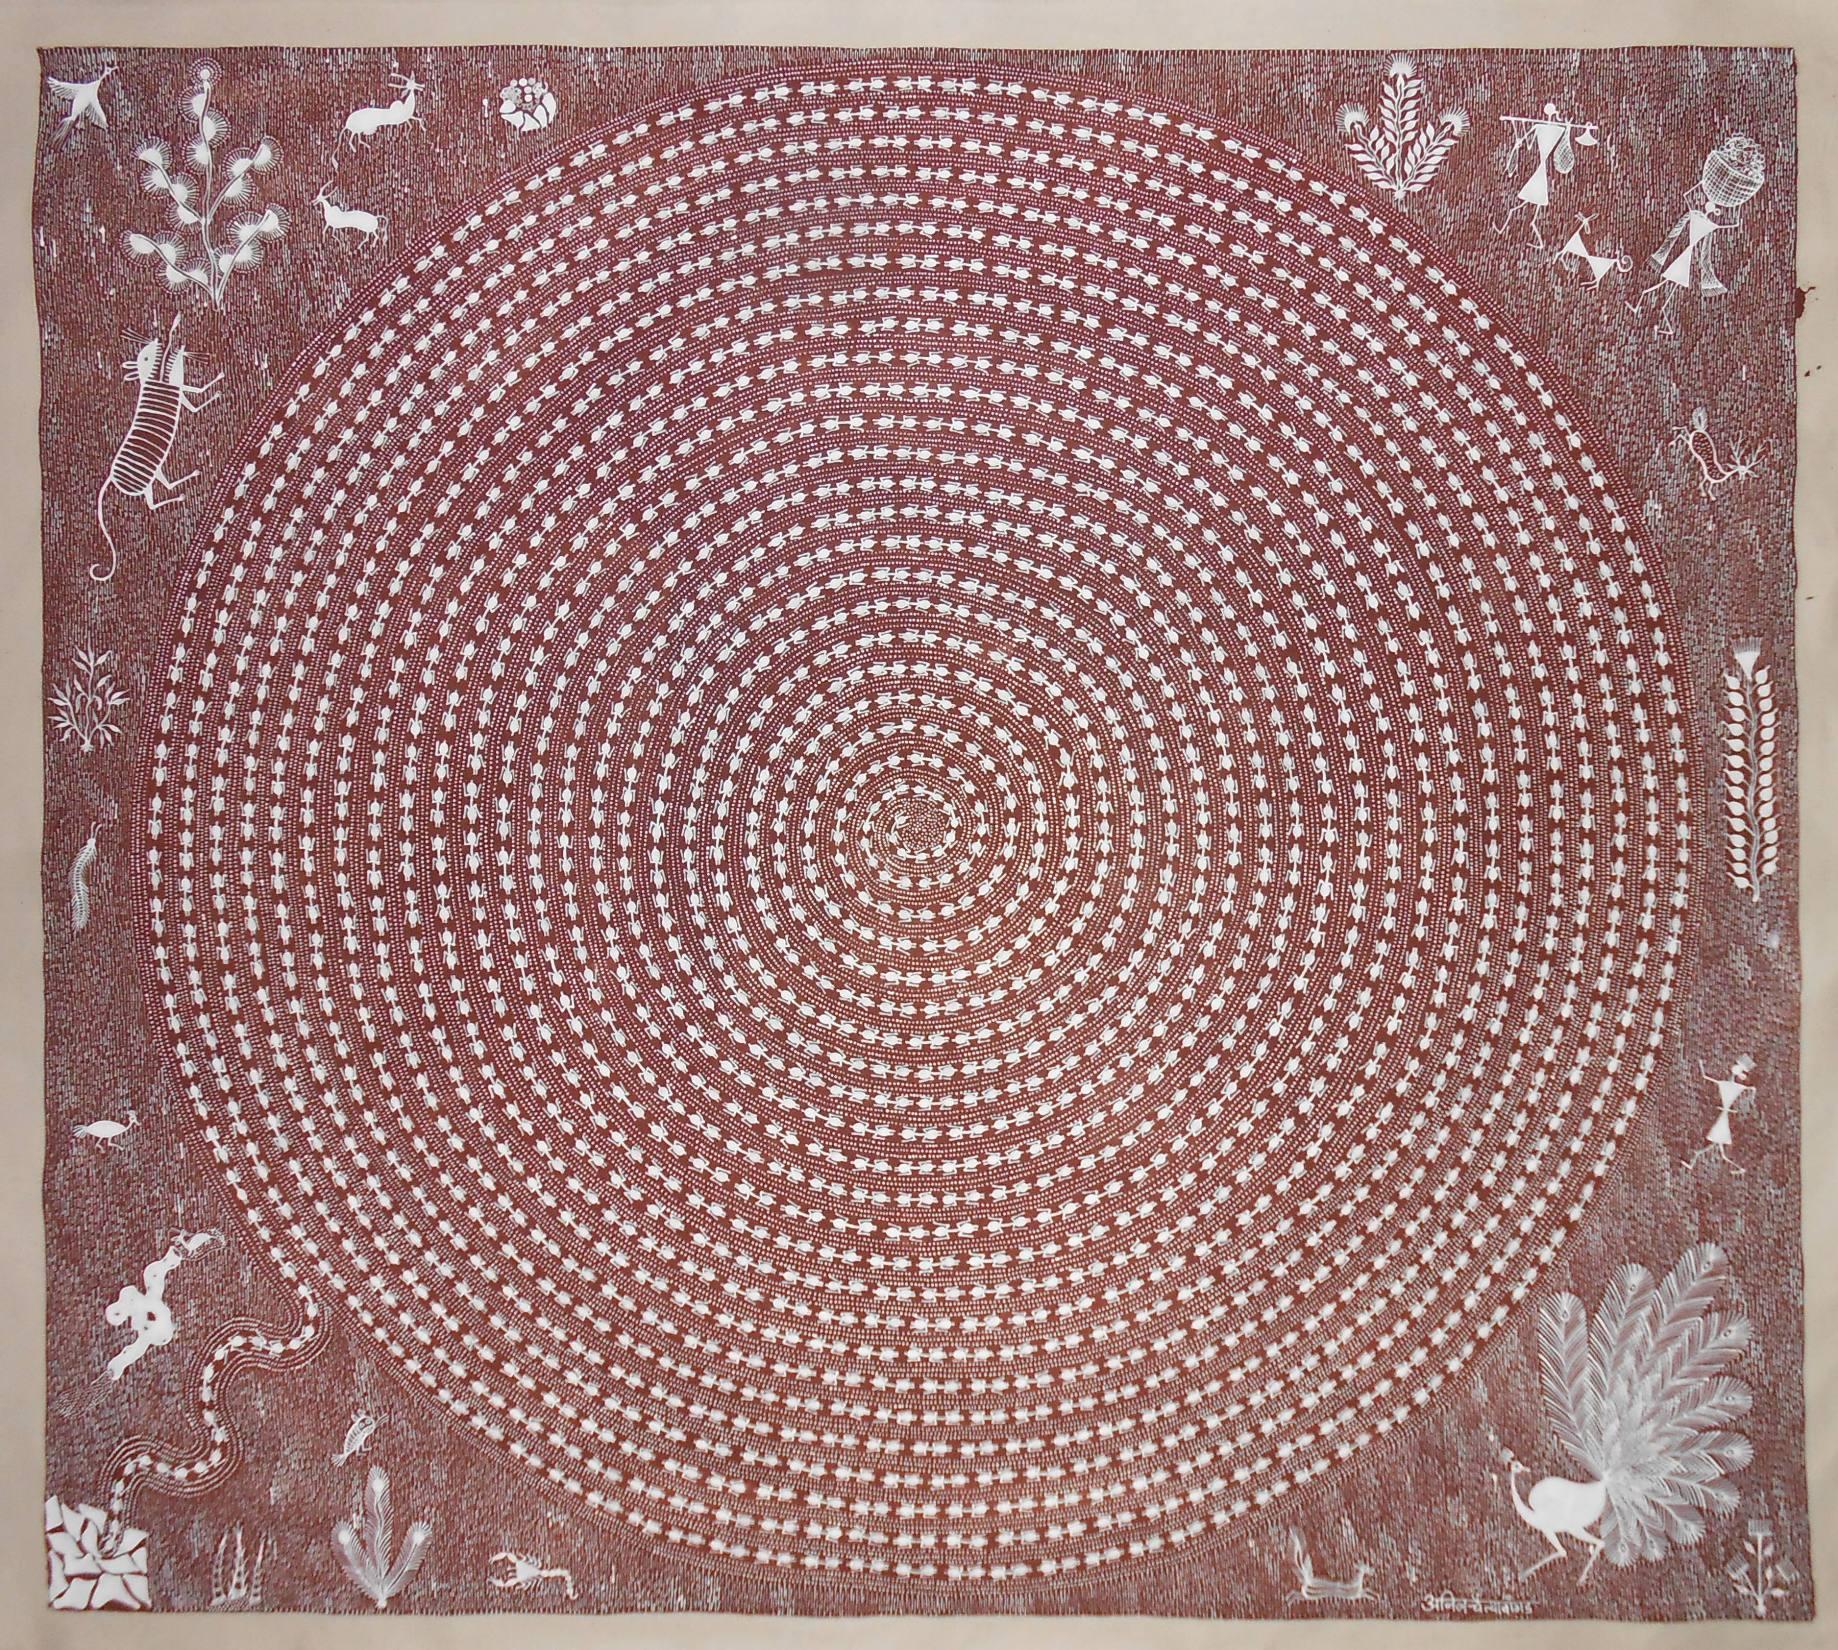 This is a fabulous animal painting on cloth canvas with red mud and white paint. The depiction of an 'ant carousel' replicates the patterns made by the tribes dancers. Like the people from the Warli tribe the ants are always busy and just like the